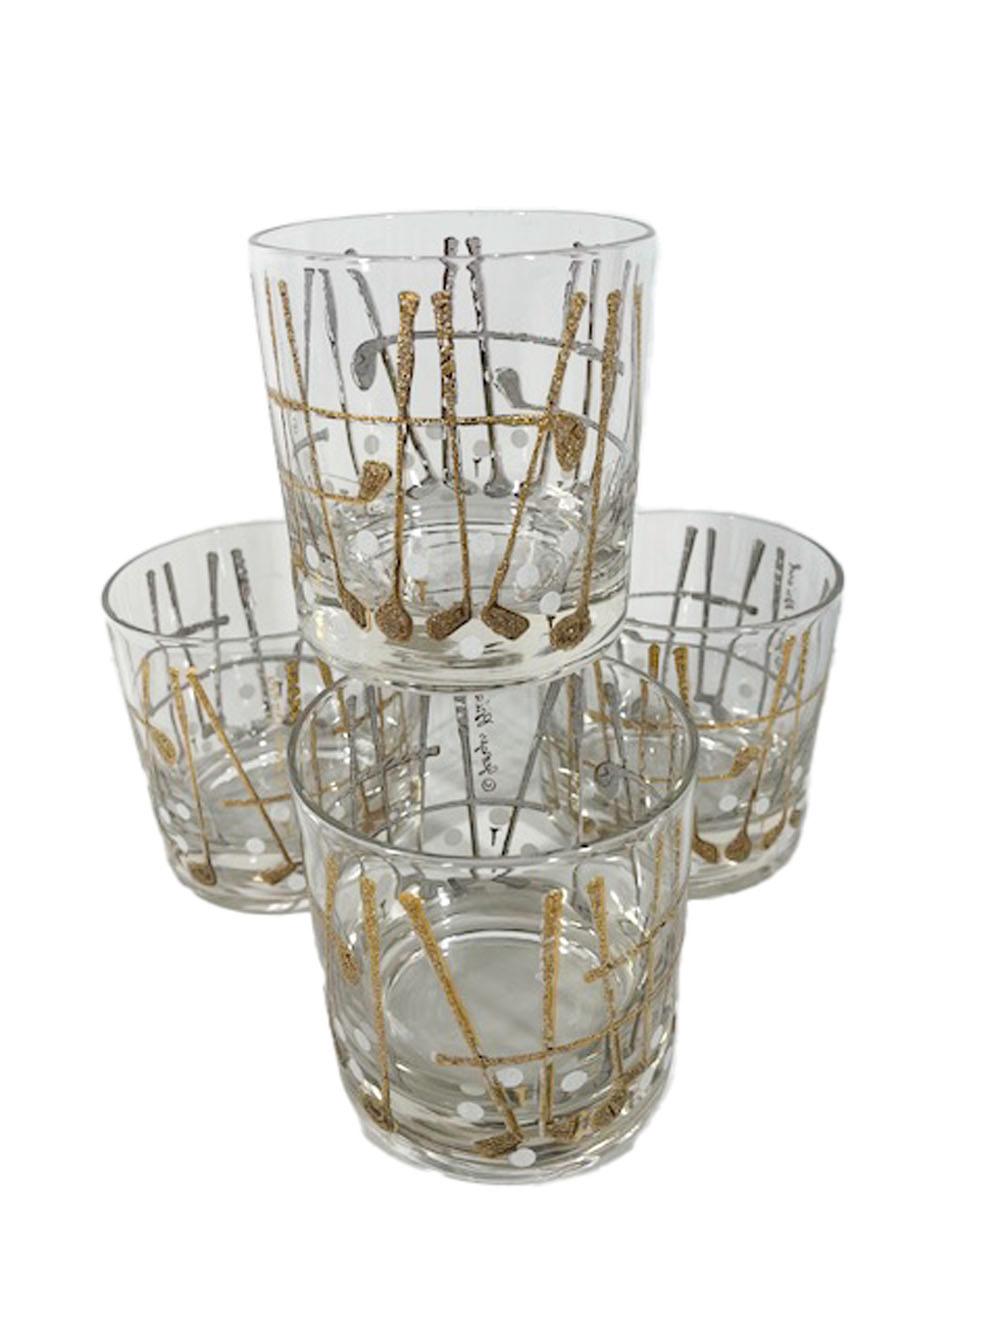 Four vintage Georges Briard golf theme glasses with raised white enamel clubs and balls, the clubs overlaid with 22 karat gold.